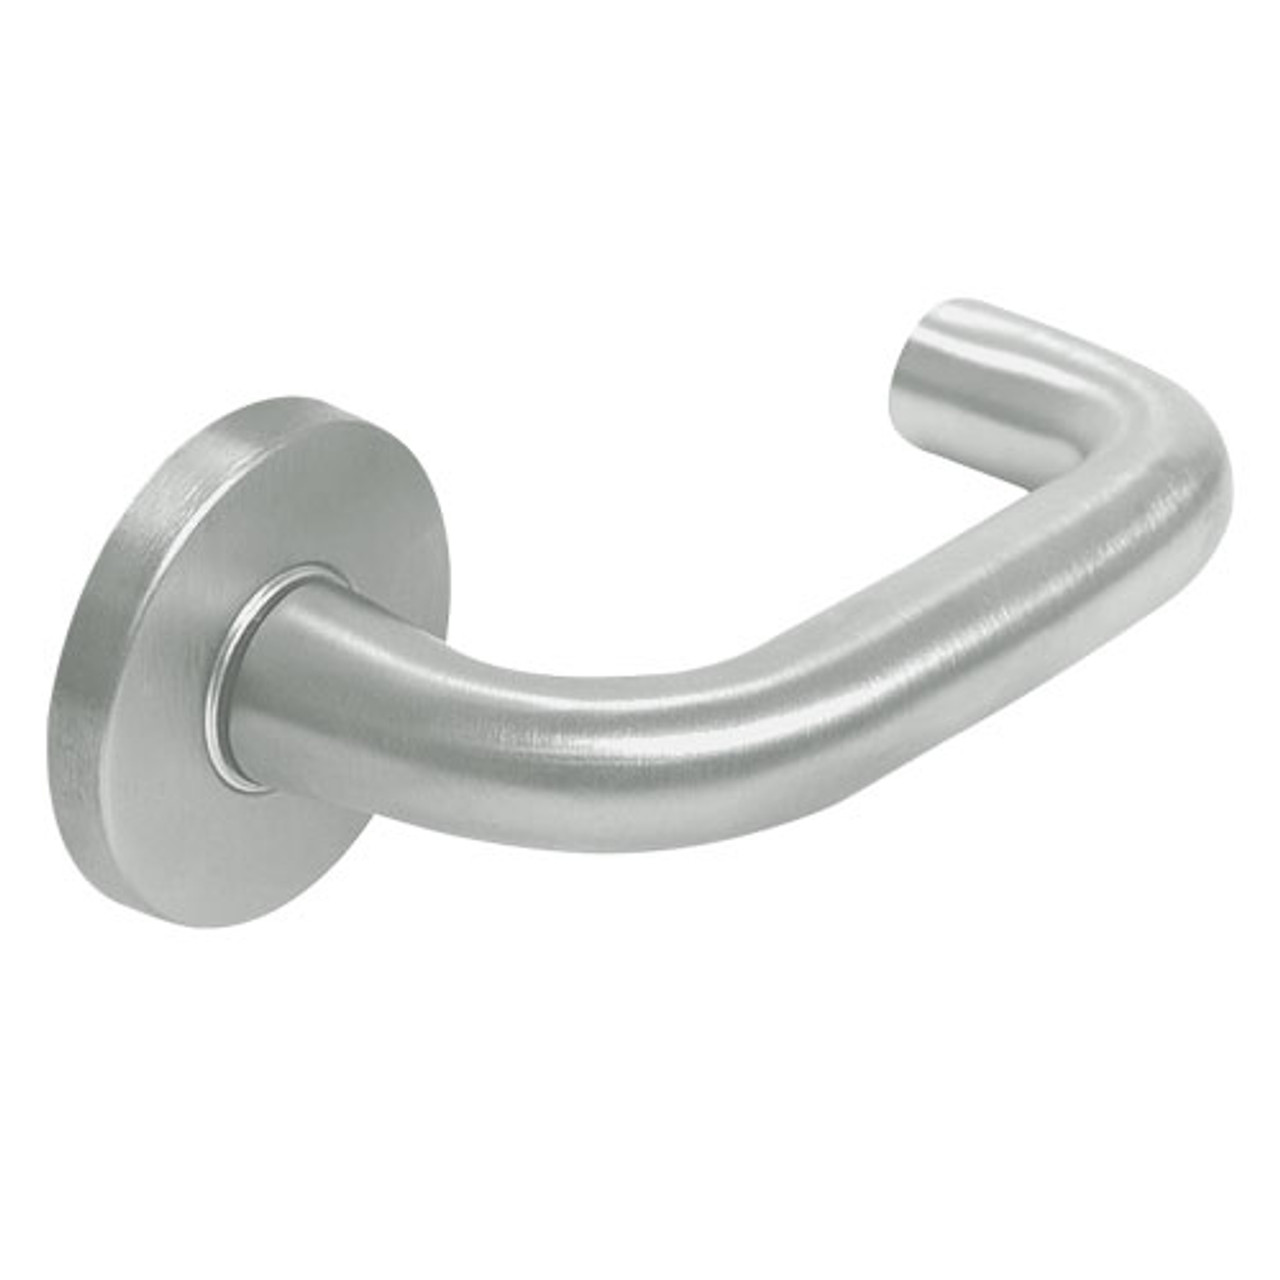 ML2054-LWF-619-M31 Corbin Russwin ML2000 Series Mortise Entrance Trim Pack with Lustra Lever in Satin Nickel